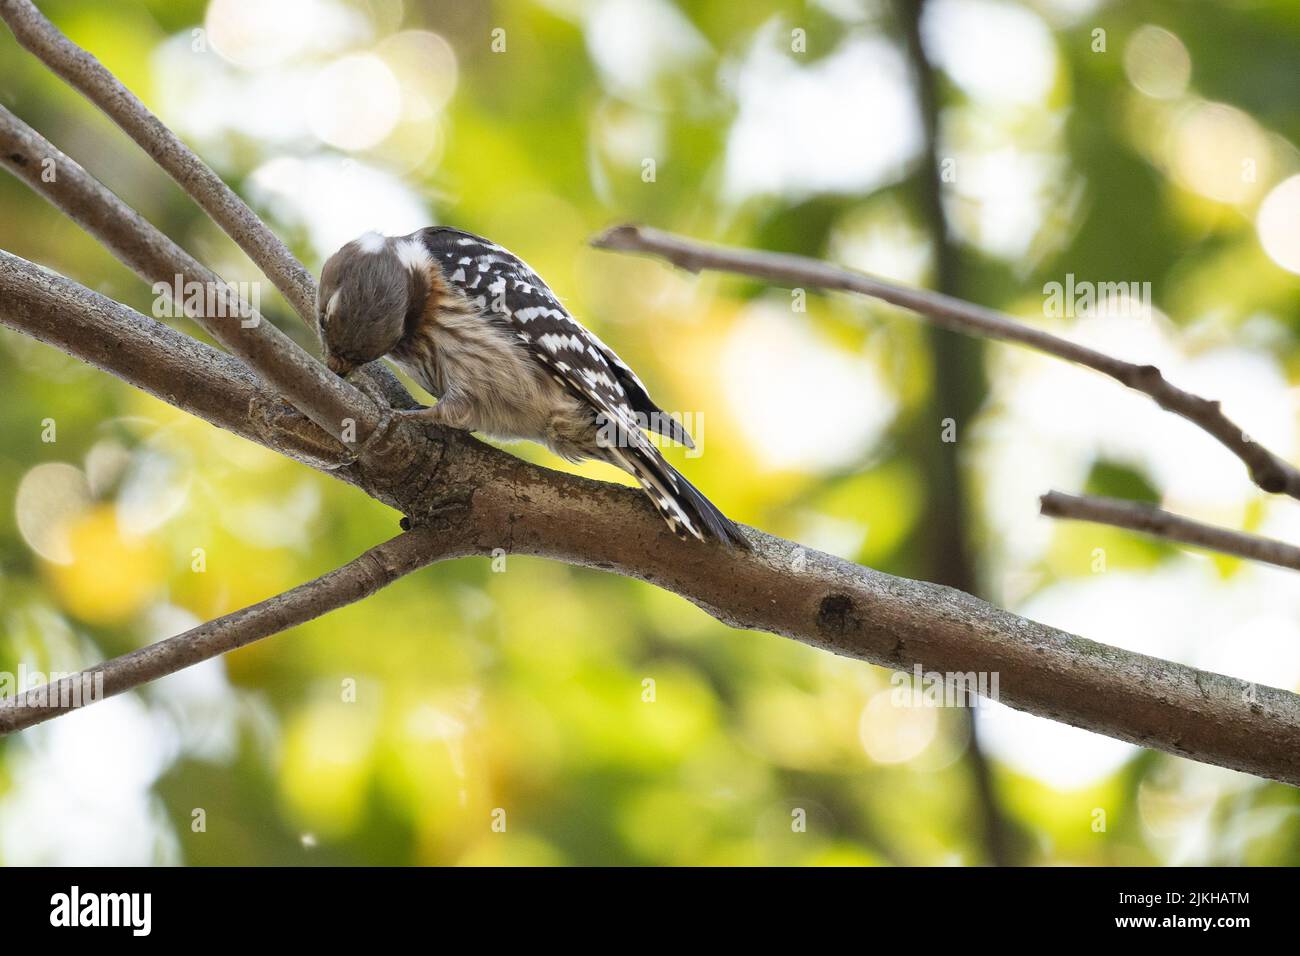 A close-up shot of a Japanese pygmy woodpecker on a branch Stock Photo